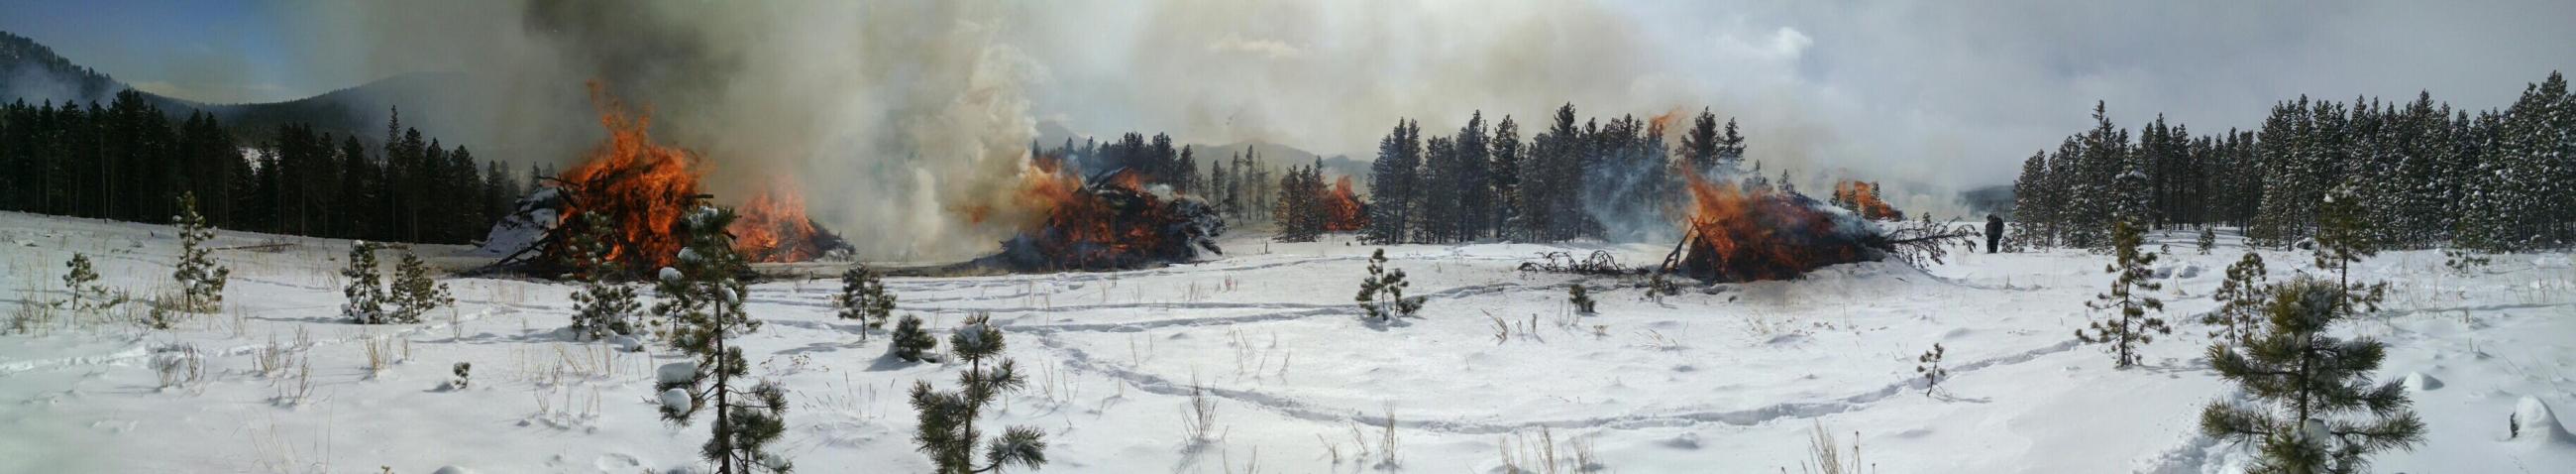 smoke and piles burning in snow